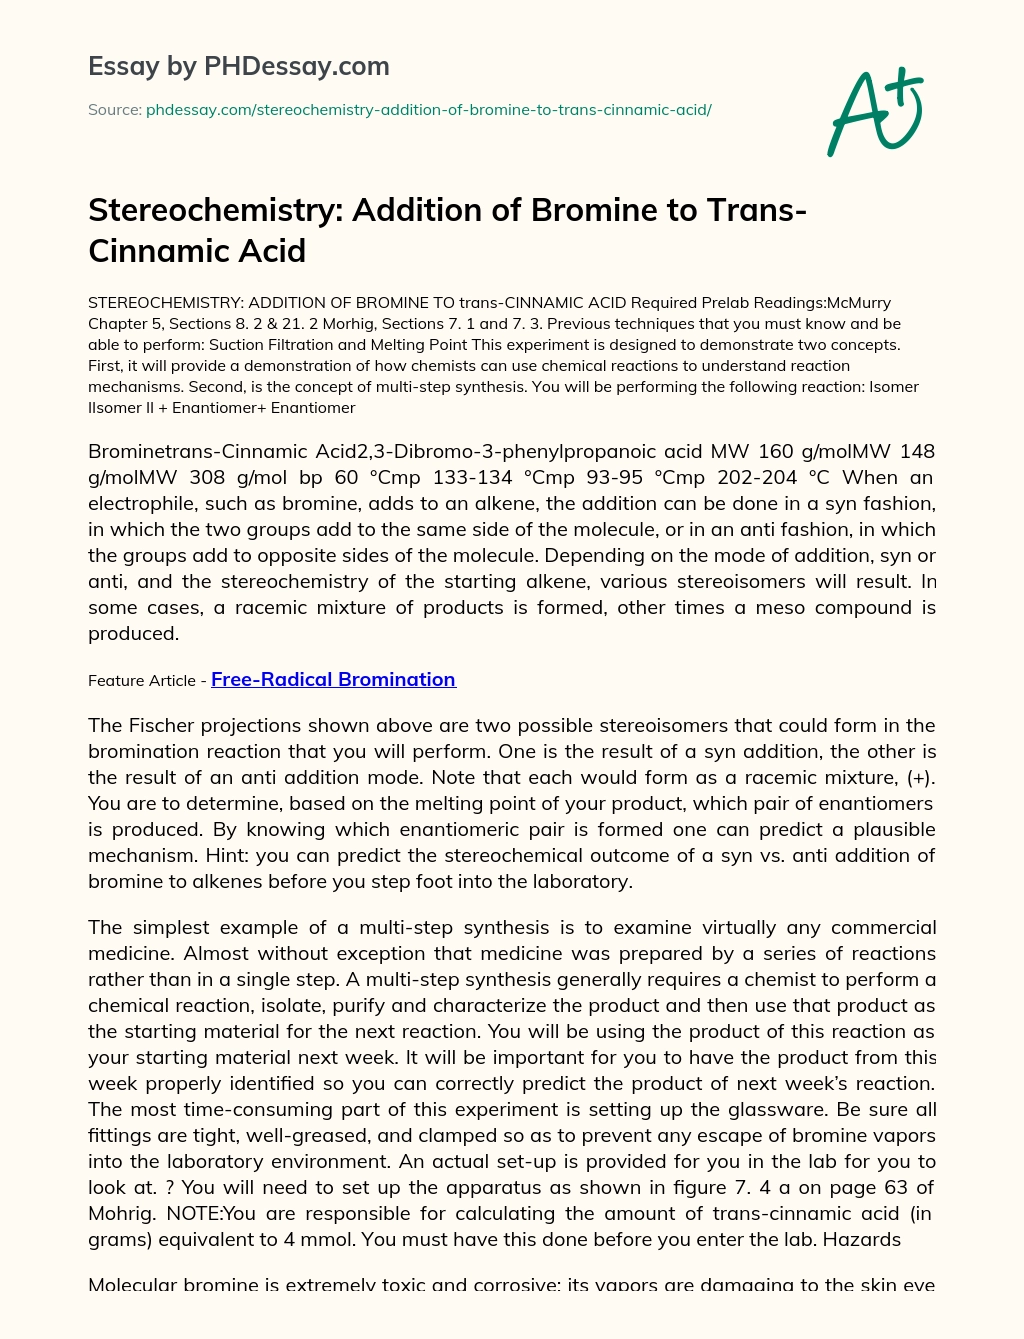 Stereochemistry: Addition of Bromine to Trans-Cinnamic Acid essay